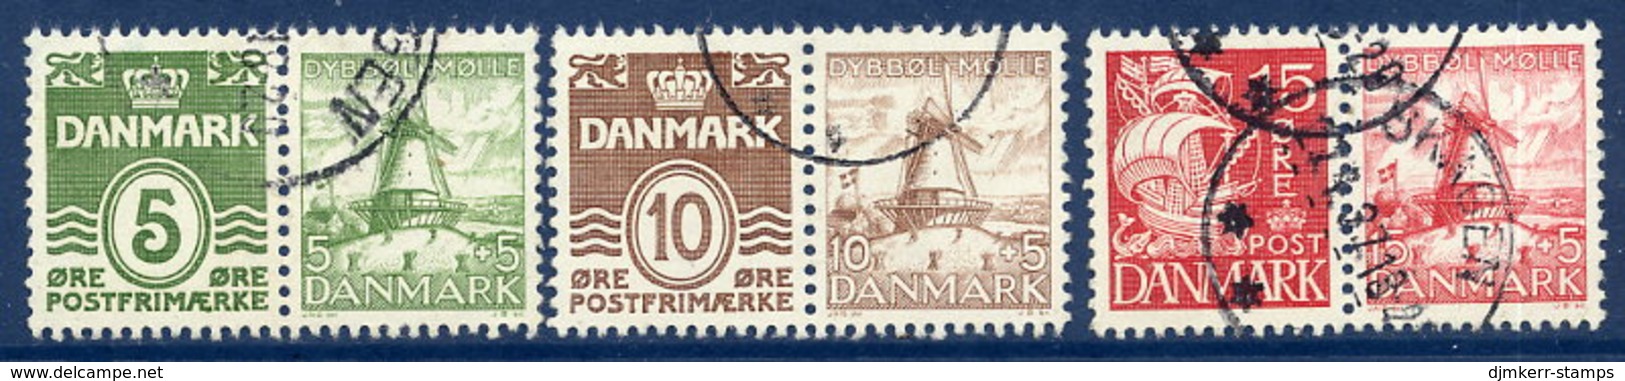 DENMARK 1937 Hanssen Fund Set Of 3 Se-tenant Pairs, Used. - Used Stamps